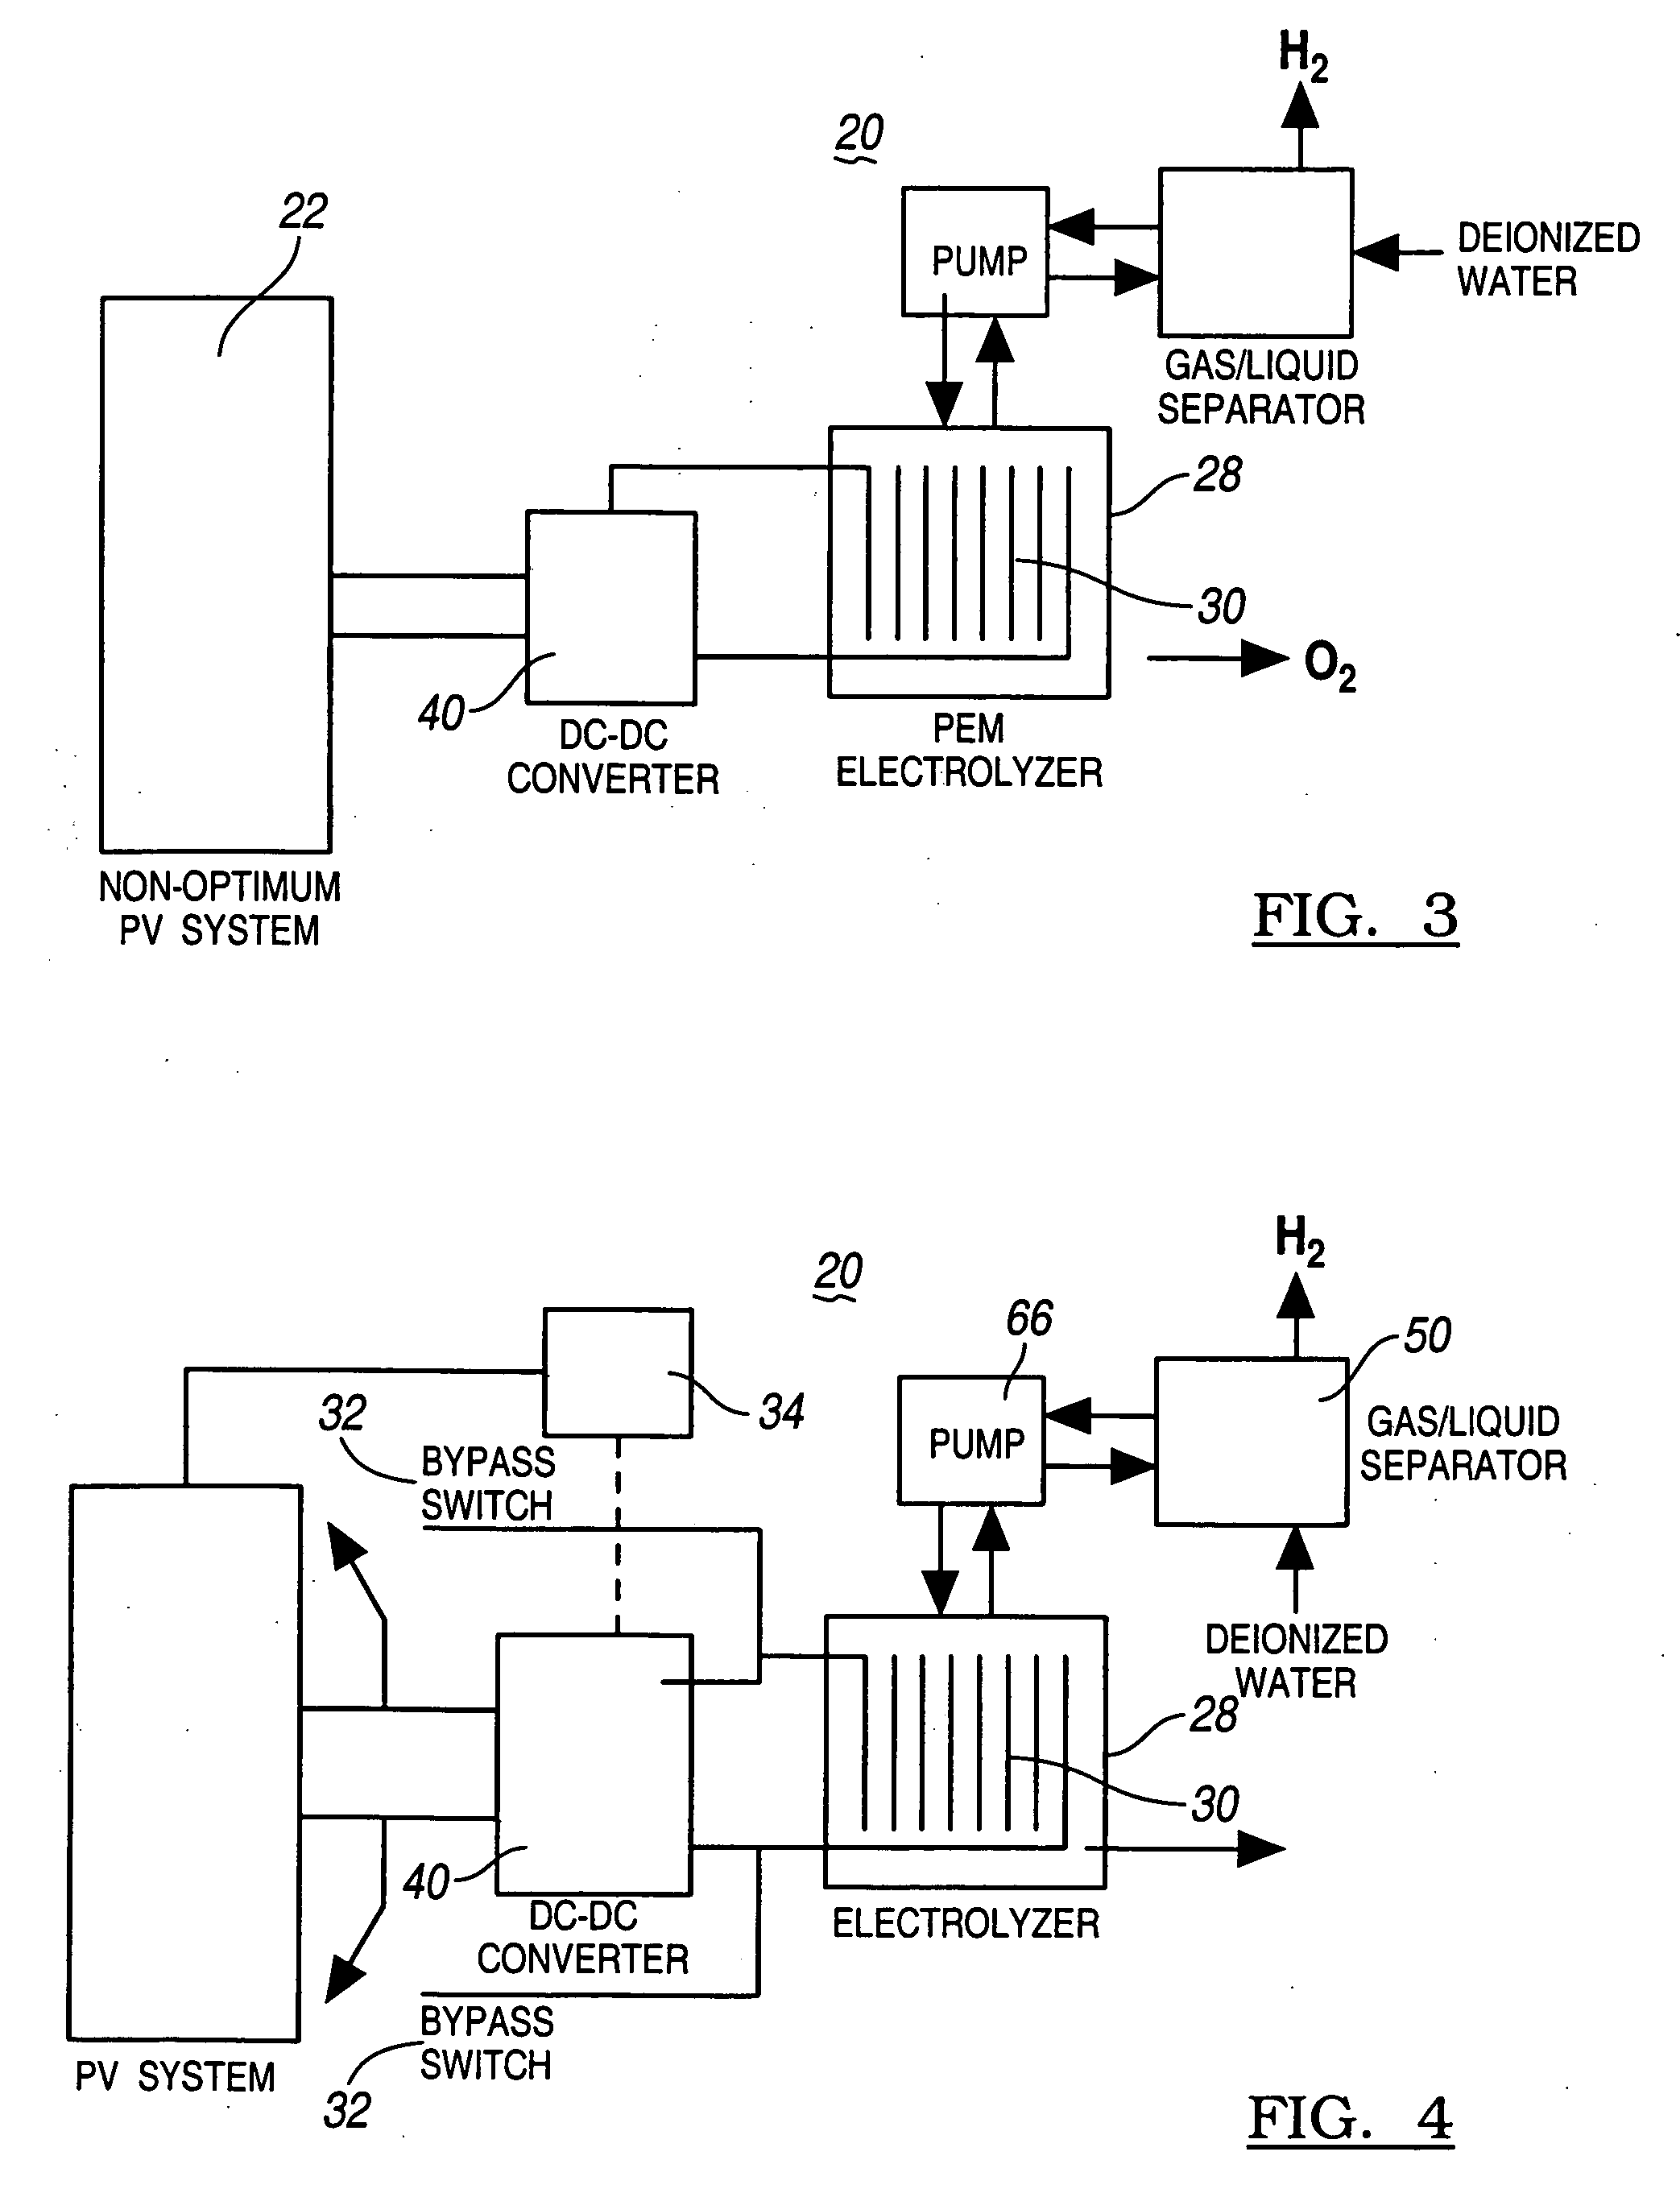 System and sub-systems for production and use of hydrogen